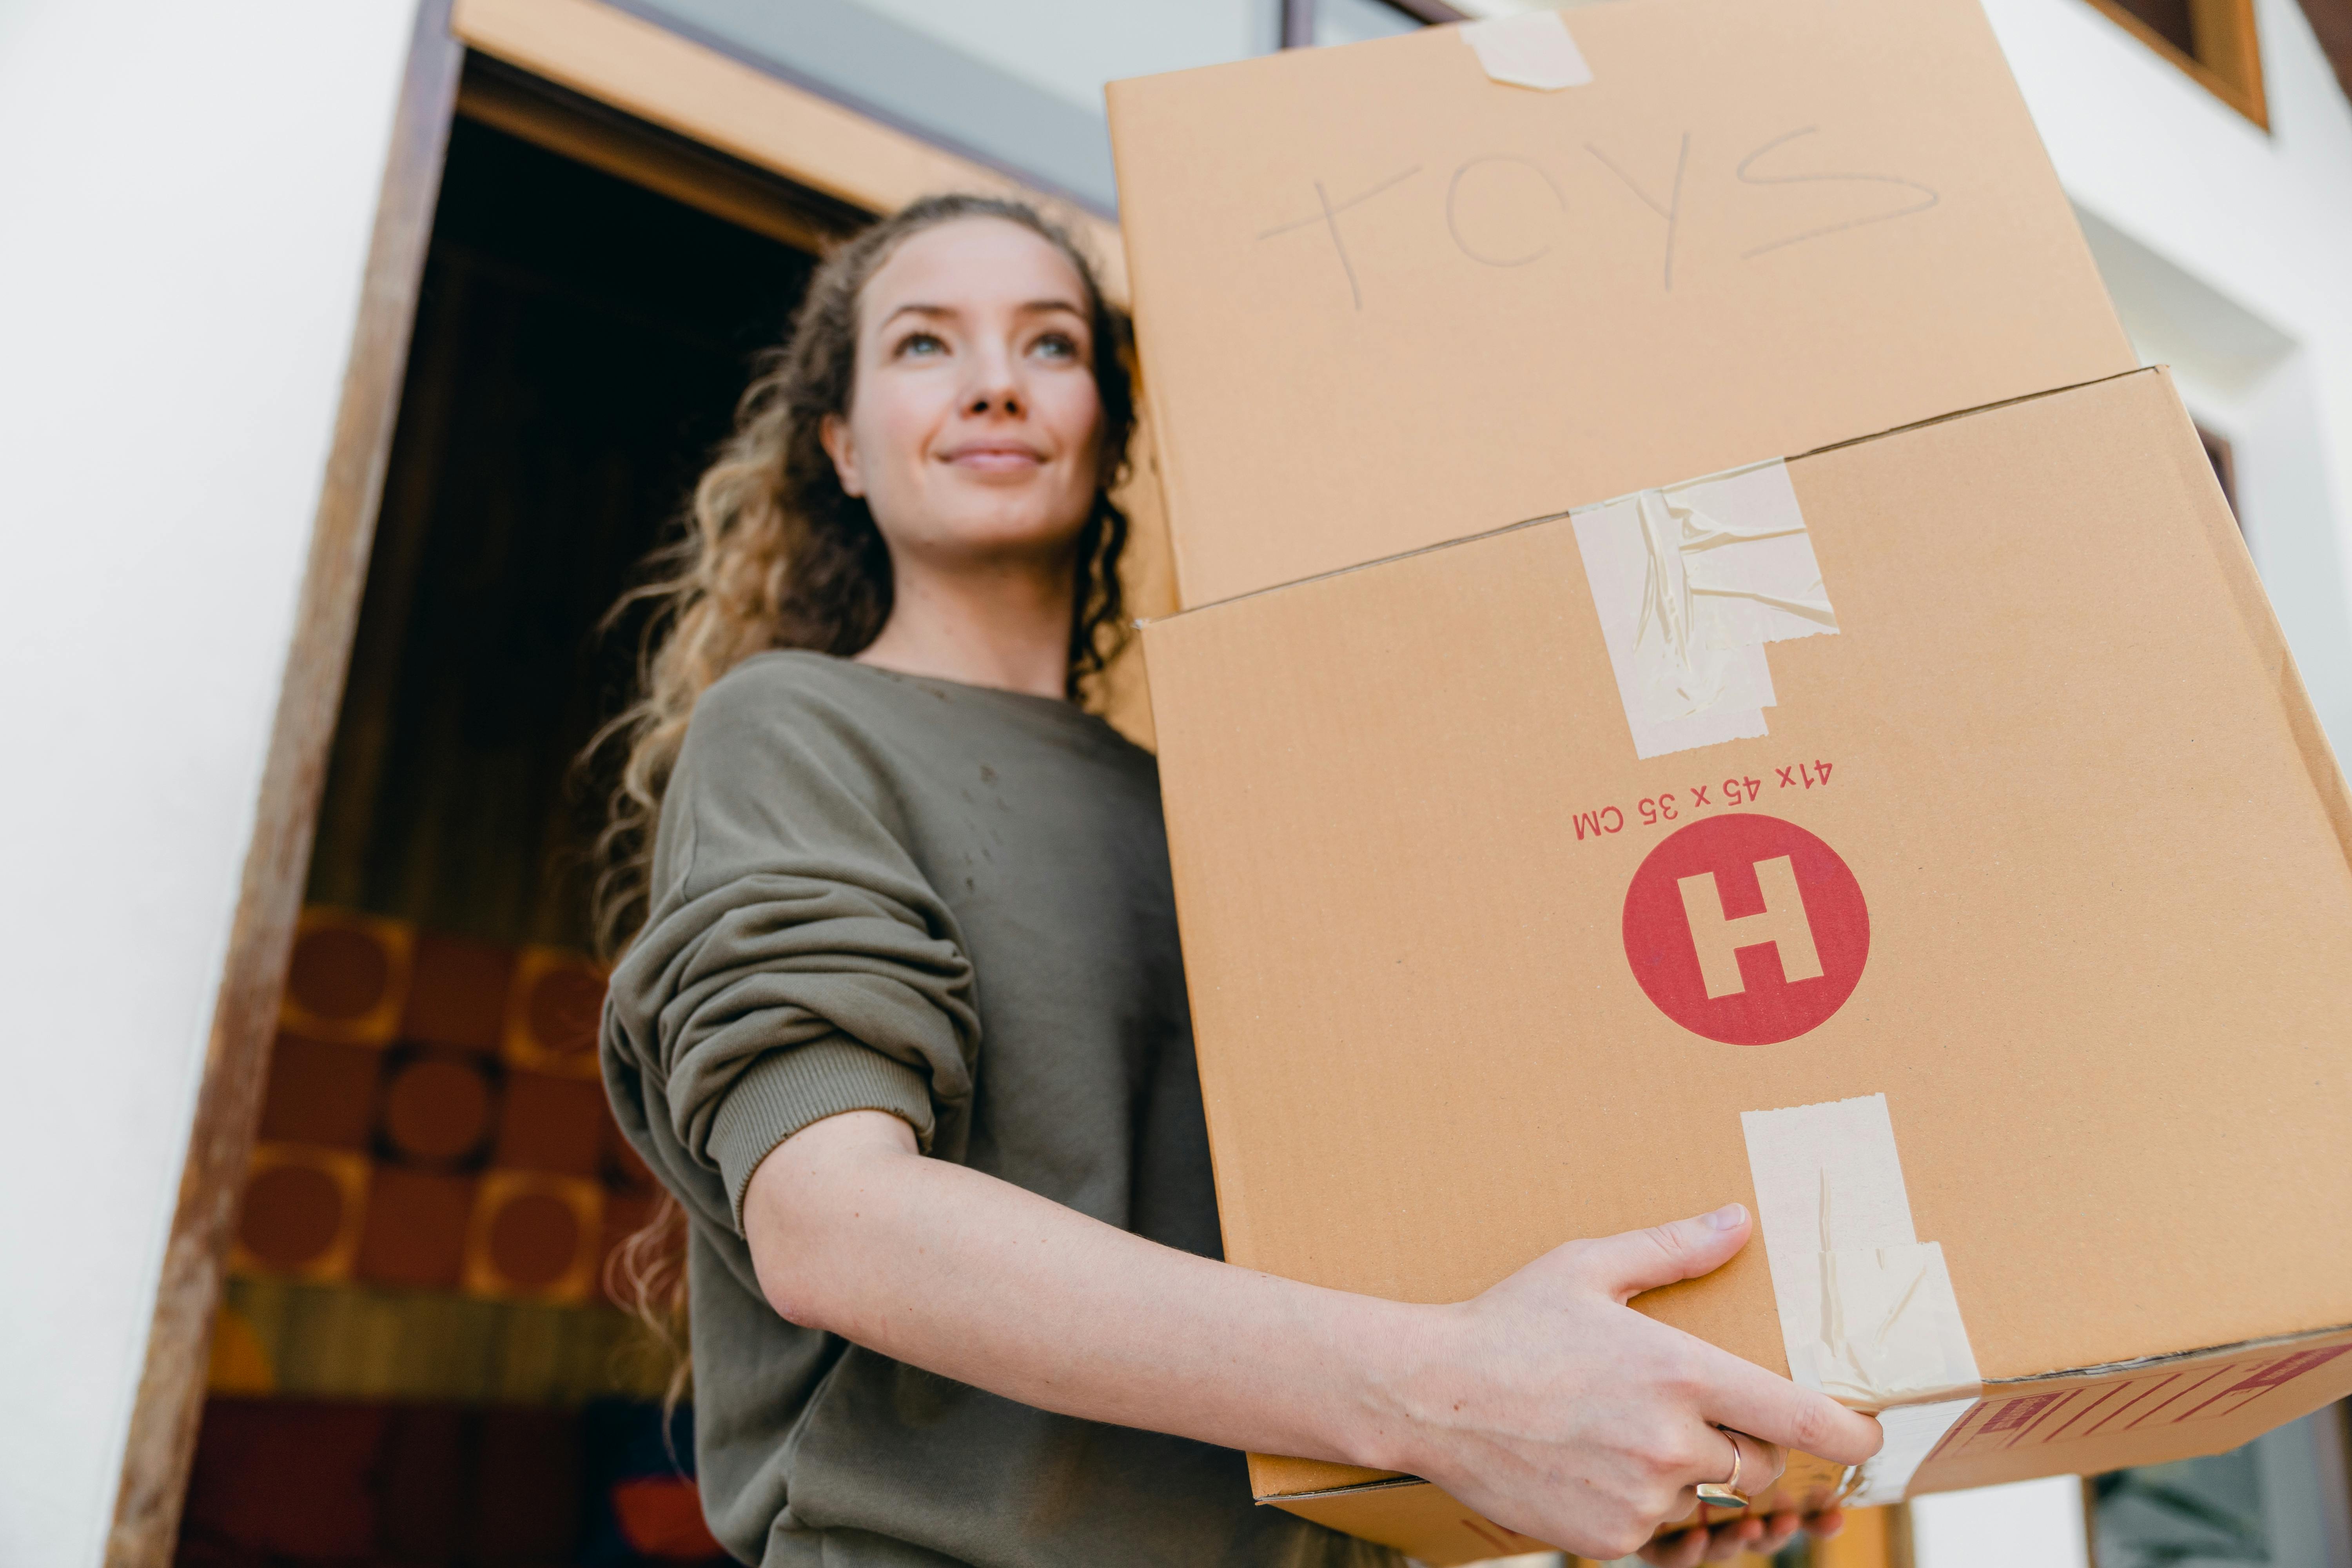 Woman carrying a lot of boxes | Source: Pexels